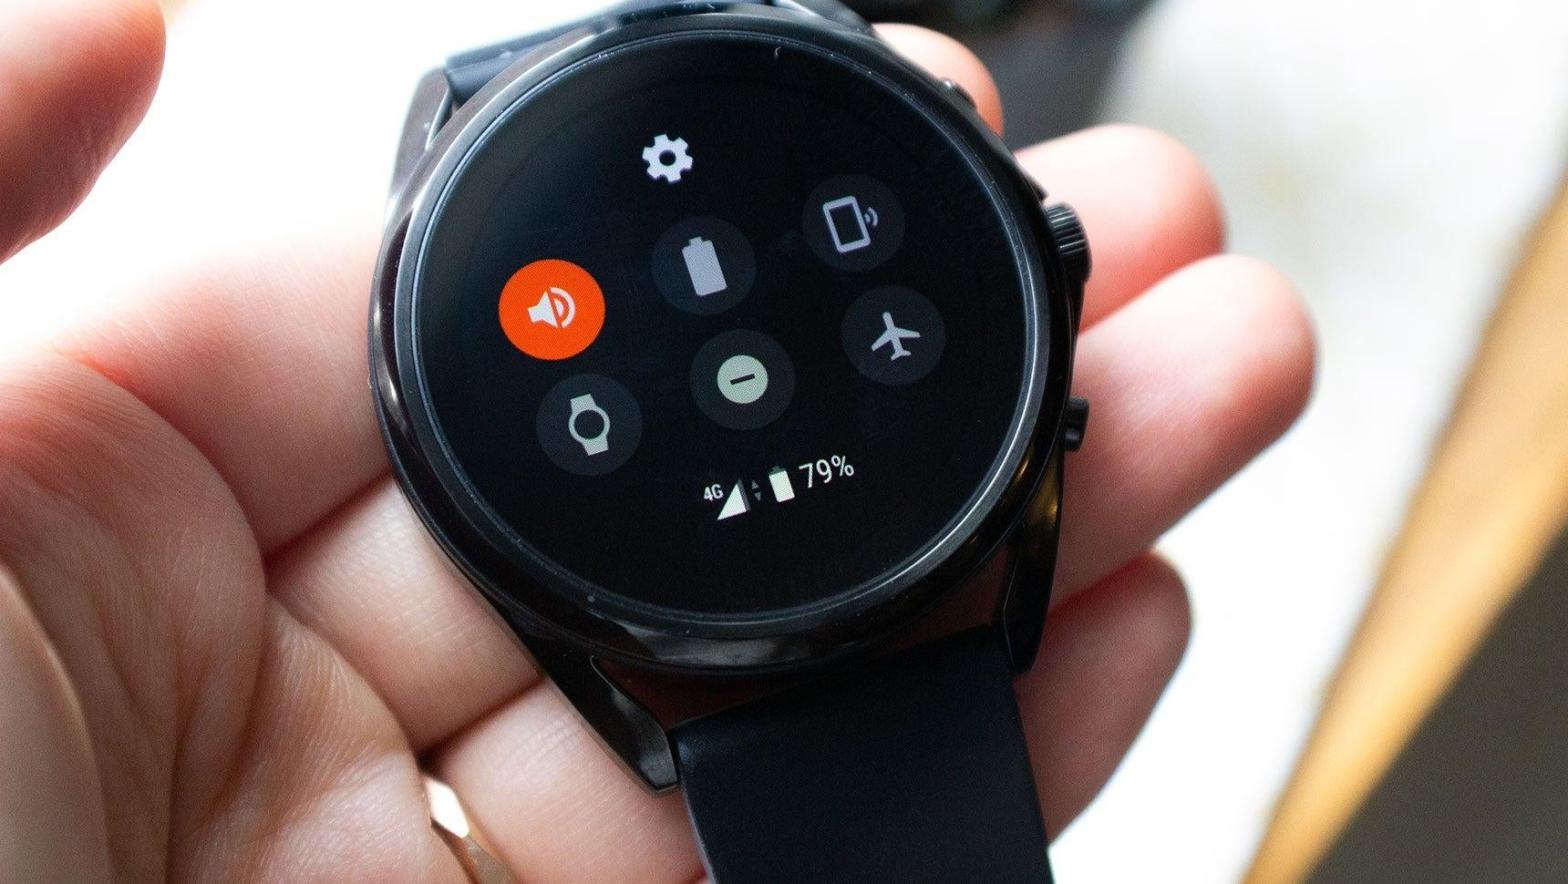 Fossil's first cellular watch, the Gen 5 LTE. (Photo: Victoria Song/Gizmodo)